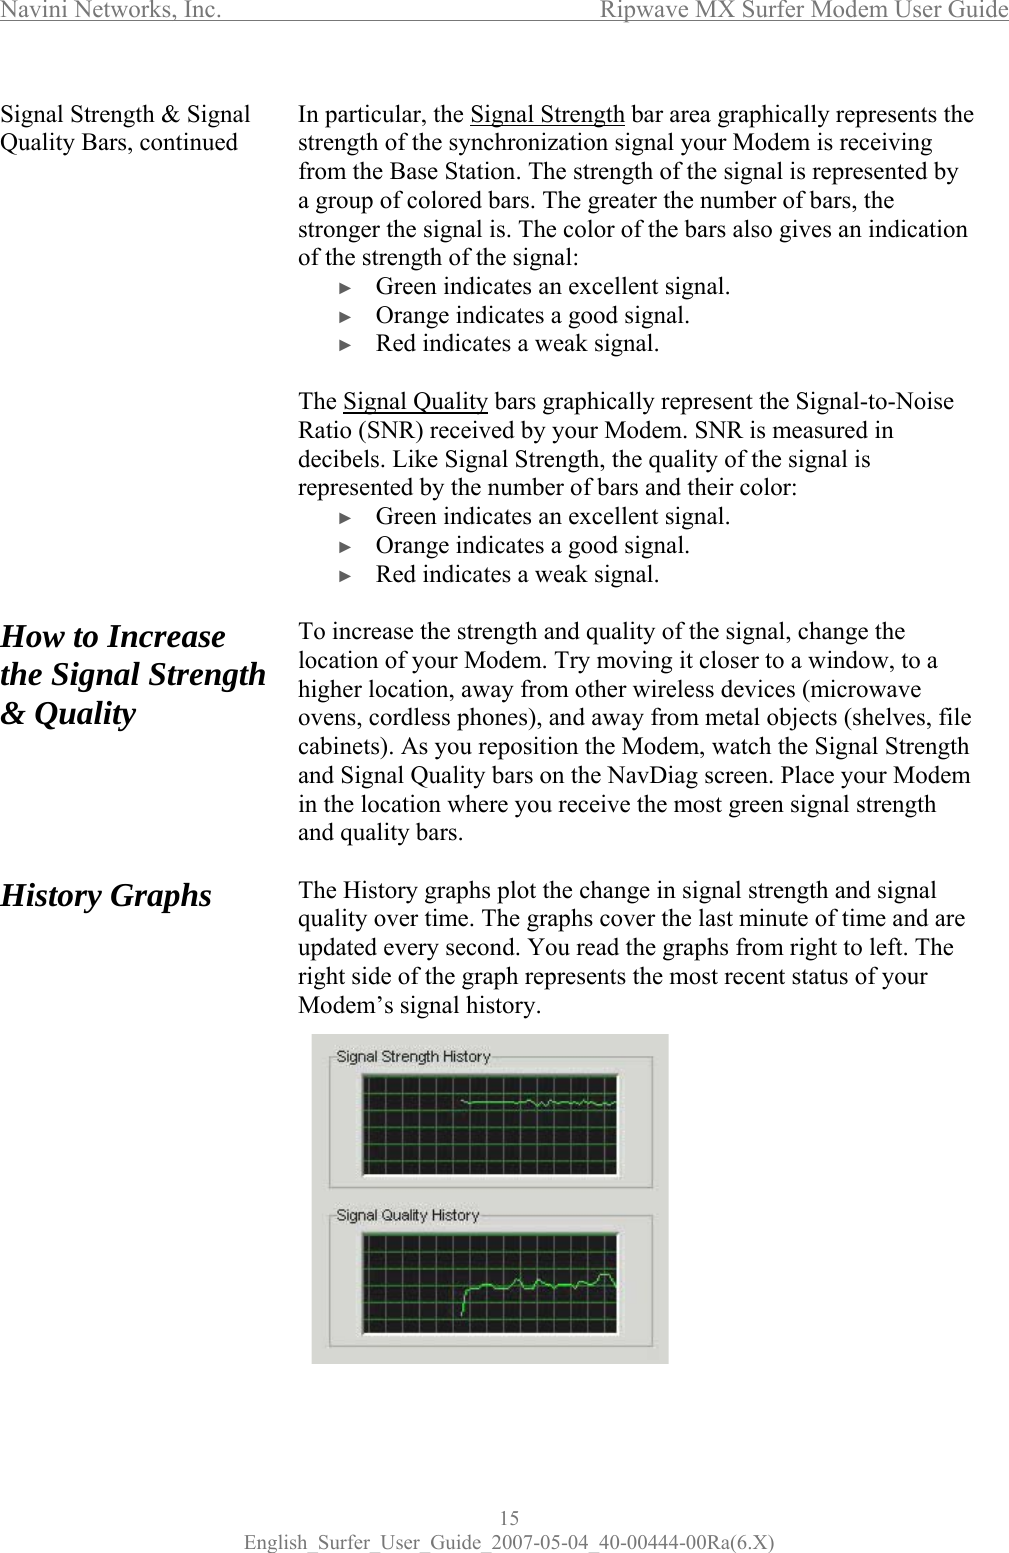 Navini Networks, Inc.      Ripwave MX Surfer Modem User Guide 15 English_Surfer_User_Guide_2007-05-04_40-00444-00Ra(6.X) Signal Strength &amp; Signal Quality Bars, continued                 How to Increase the Signal Strength &amp; Quality      History Graphs               In particular, the Signal Strength bar area graphically represents the strength of the synchronization signal your Modem is receiving from the Base Station. The strength of the signal is represented by a group of colored bars. The greater the number of bars, the stronger the signal is. The color of the bars also gives an indication of the strength of the signal: ► Green indicates an excellent signal.  ► Orange indicates a good signal. ► Red indicates a weak signal.  The Signal Quality bars graphically represent the Signal-to-Noise Ratio (SNR) received by your Modem. SNR is measured in decibels. Like Signal Strength, the quality of the signal is represented by the number of bars and their color: ► Green indicates an excellent signal.  ► Orange indicates a good signal.  ► Red indicates a weak signal.  To increase the strength and quality of the signal, change the location of your Modem. Try moving it closer to a window, to a higher location, away from other wireless devices (microwave ovens, cordless phones), and away from metal objects (shelves, file cabinets). As you reposition the Modem, watch the Signal Strength and Signal Quality bars on the NavDiag screen. Place your Modem in the location where you receive the most green signal strength and quality bars.  The History graphs plot the change in signal strength and signal quality over time. The graphs cover the last minute of time and are updated every second. You read the graphs from right to left. The right side of the graph represents the most recent status of your Modem’s signal history.          